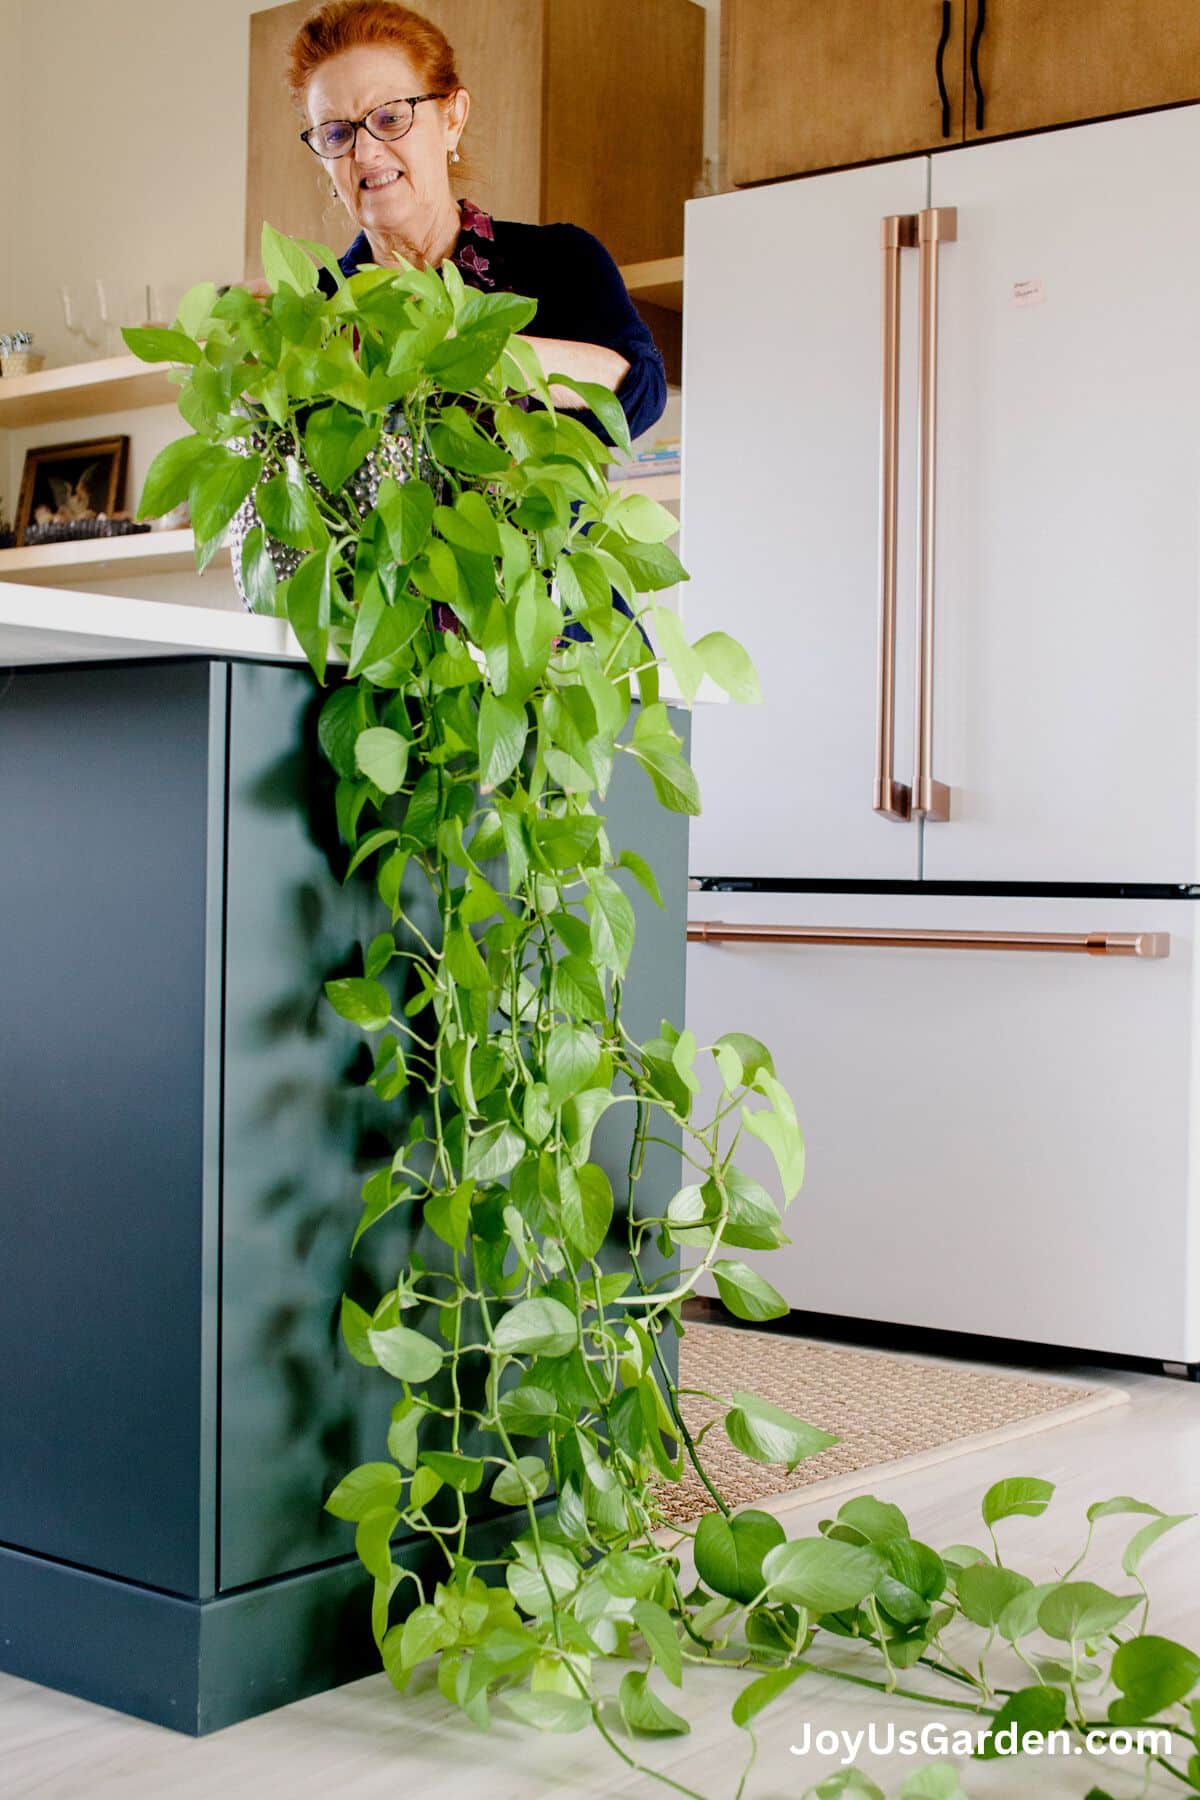 nell foster standing at ktchen counter looking down at a long trailing neon pothos in bright kitchen